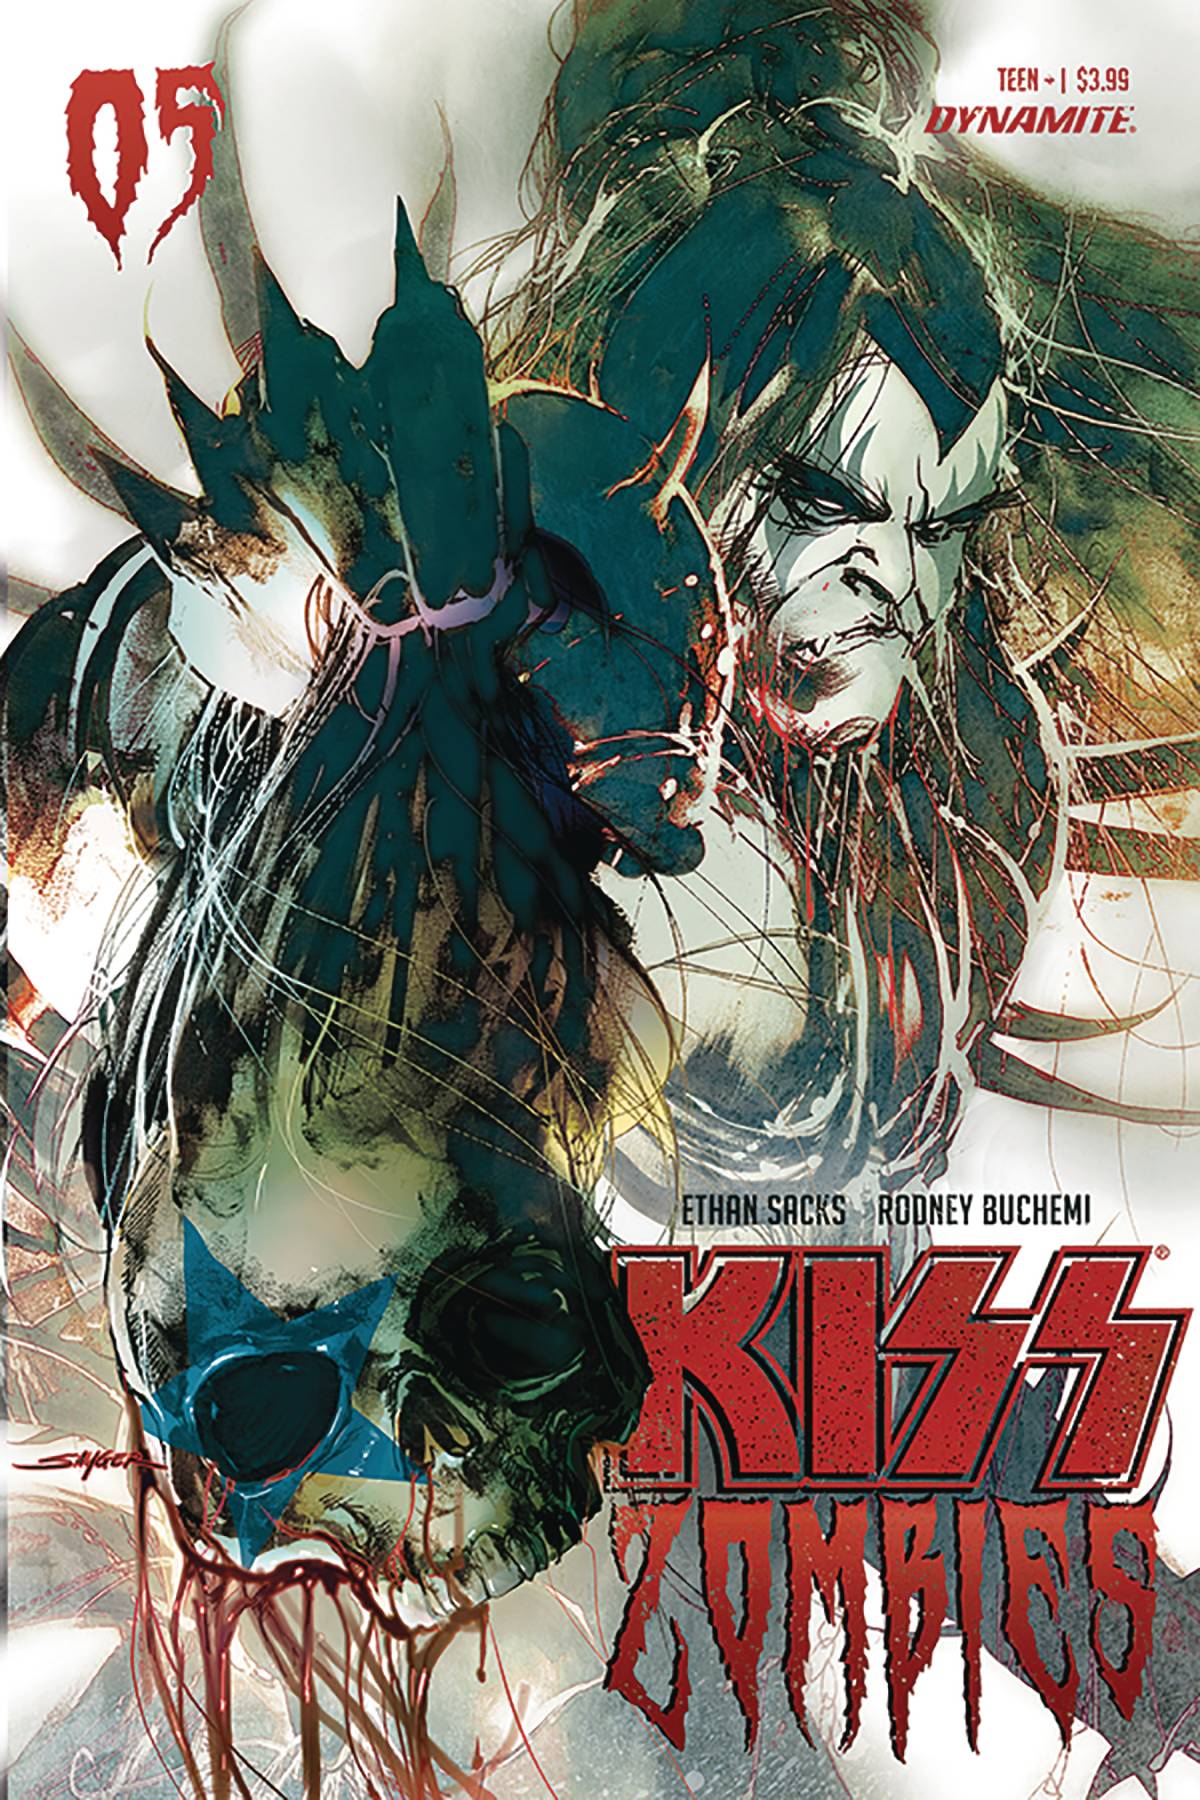 Kiss Zombies #5 Cover B Sayger